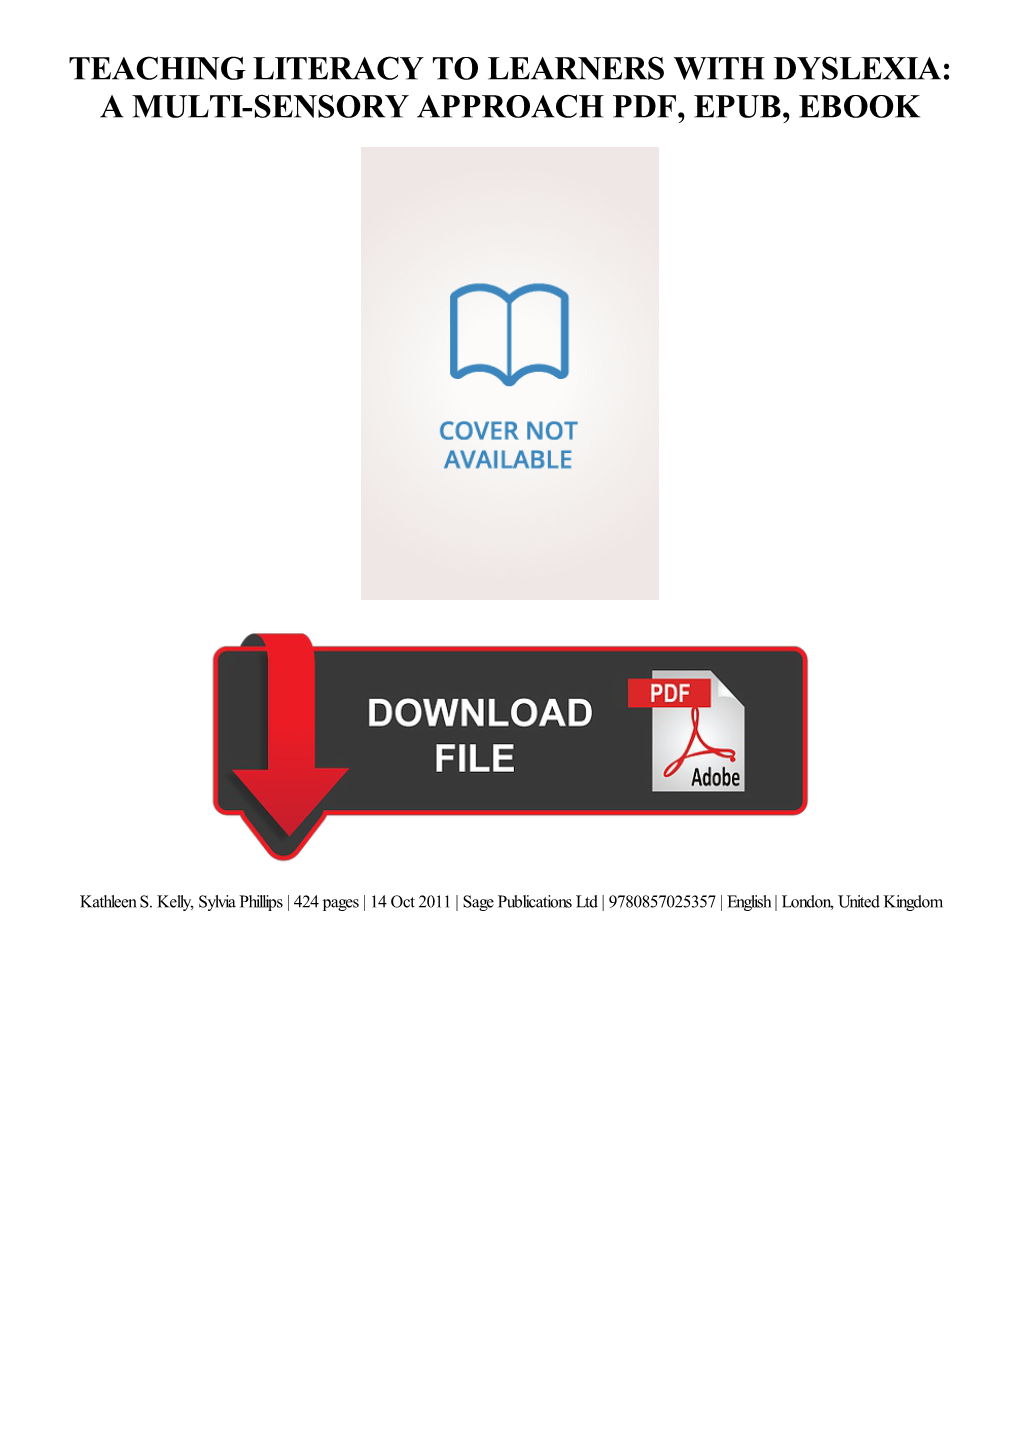 Ebook Download Teaching Literacy to Learners With